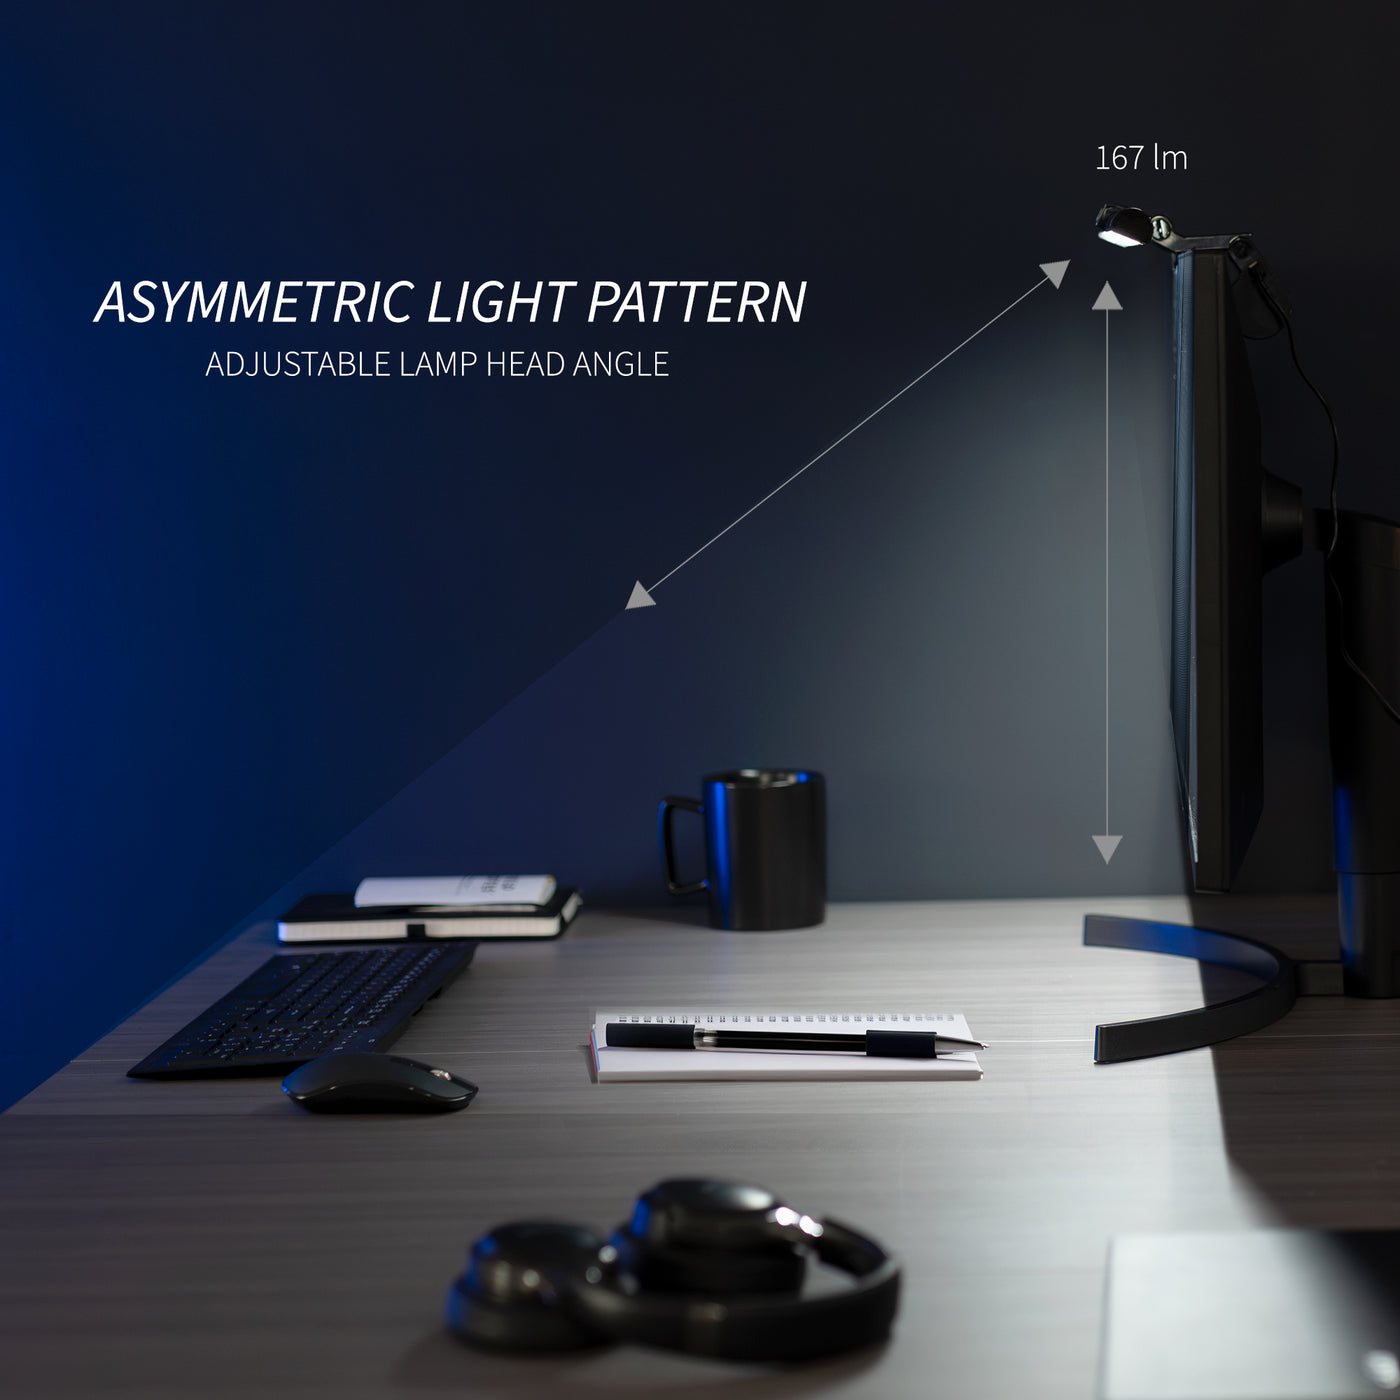 LED light bar for space saving and better desk lighting with no glare, five color temperature settings, and five brightness levels.